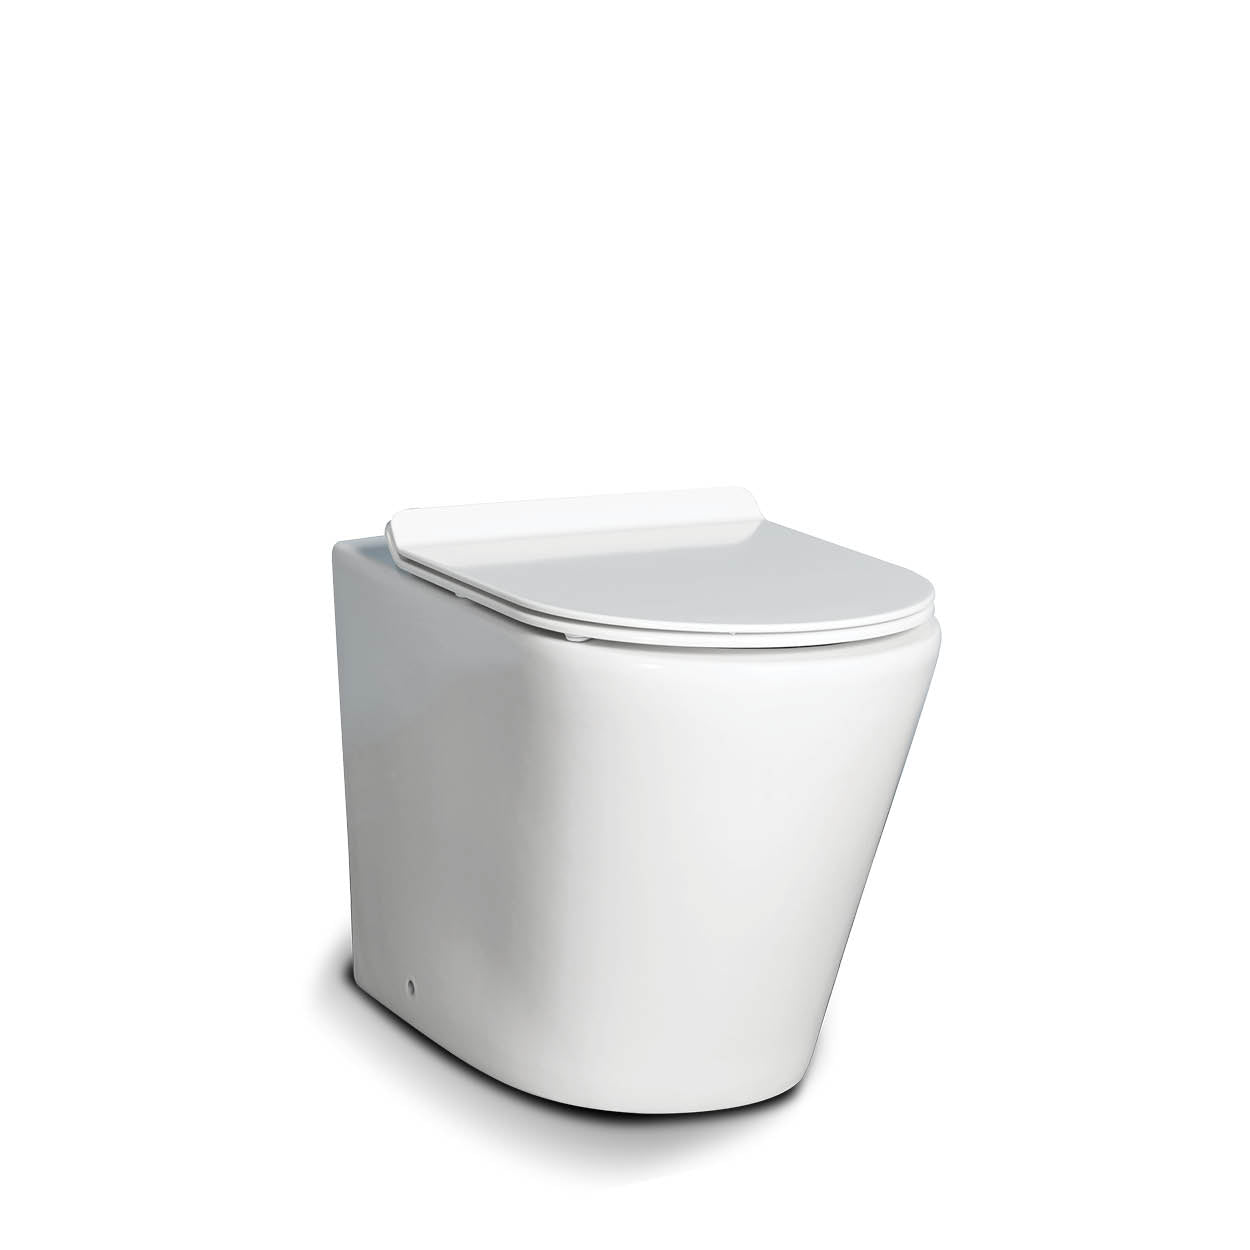 The Eyre Rimless Concealed Cistern Toilet (U)